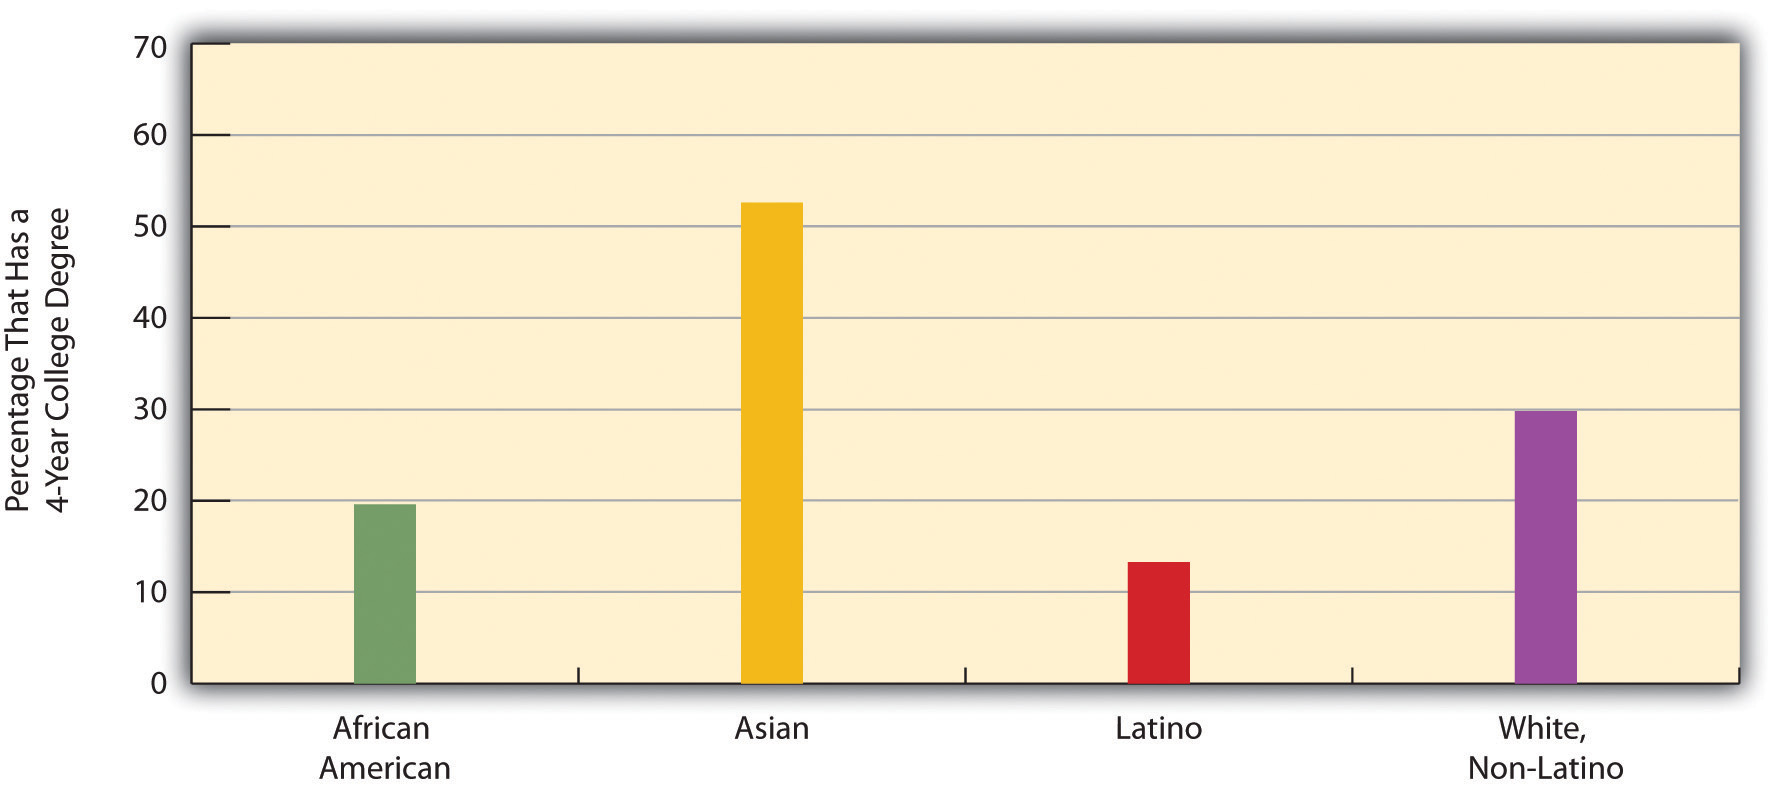 Race, Ethnicity, and Percentage of Persons 25 or Older With a 4-Year College Degree, 2008